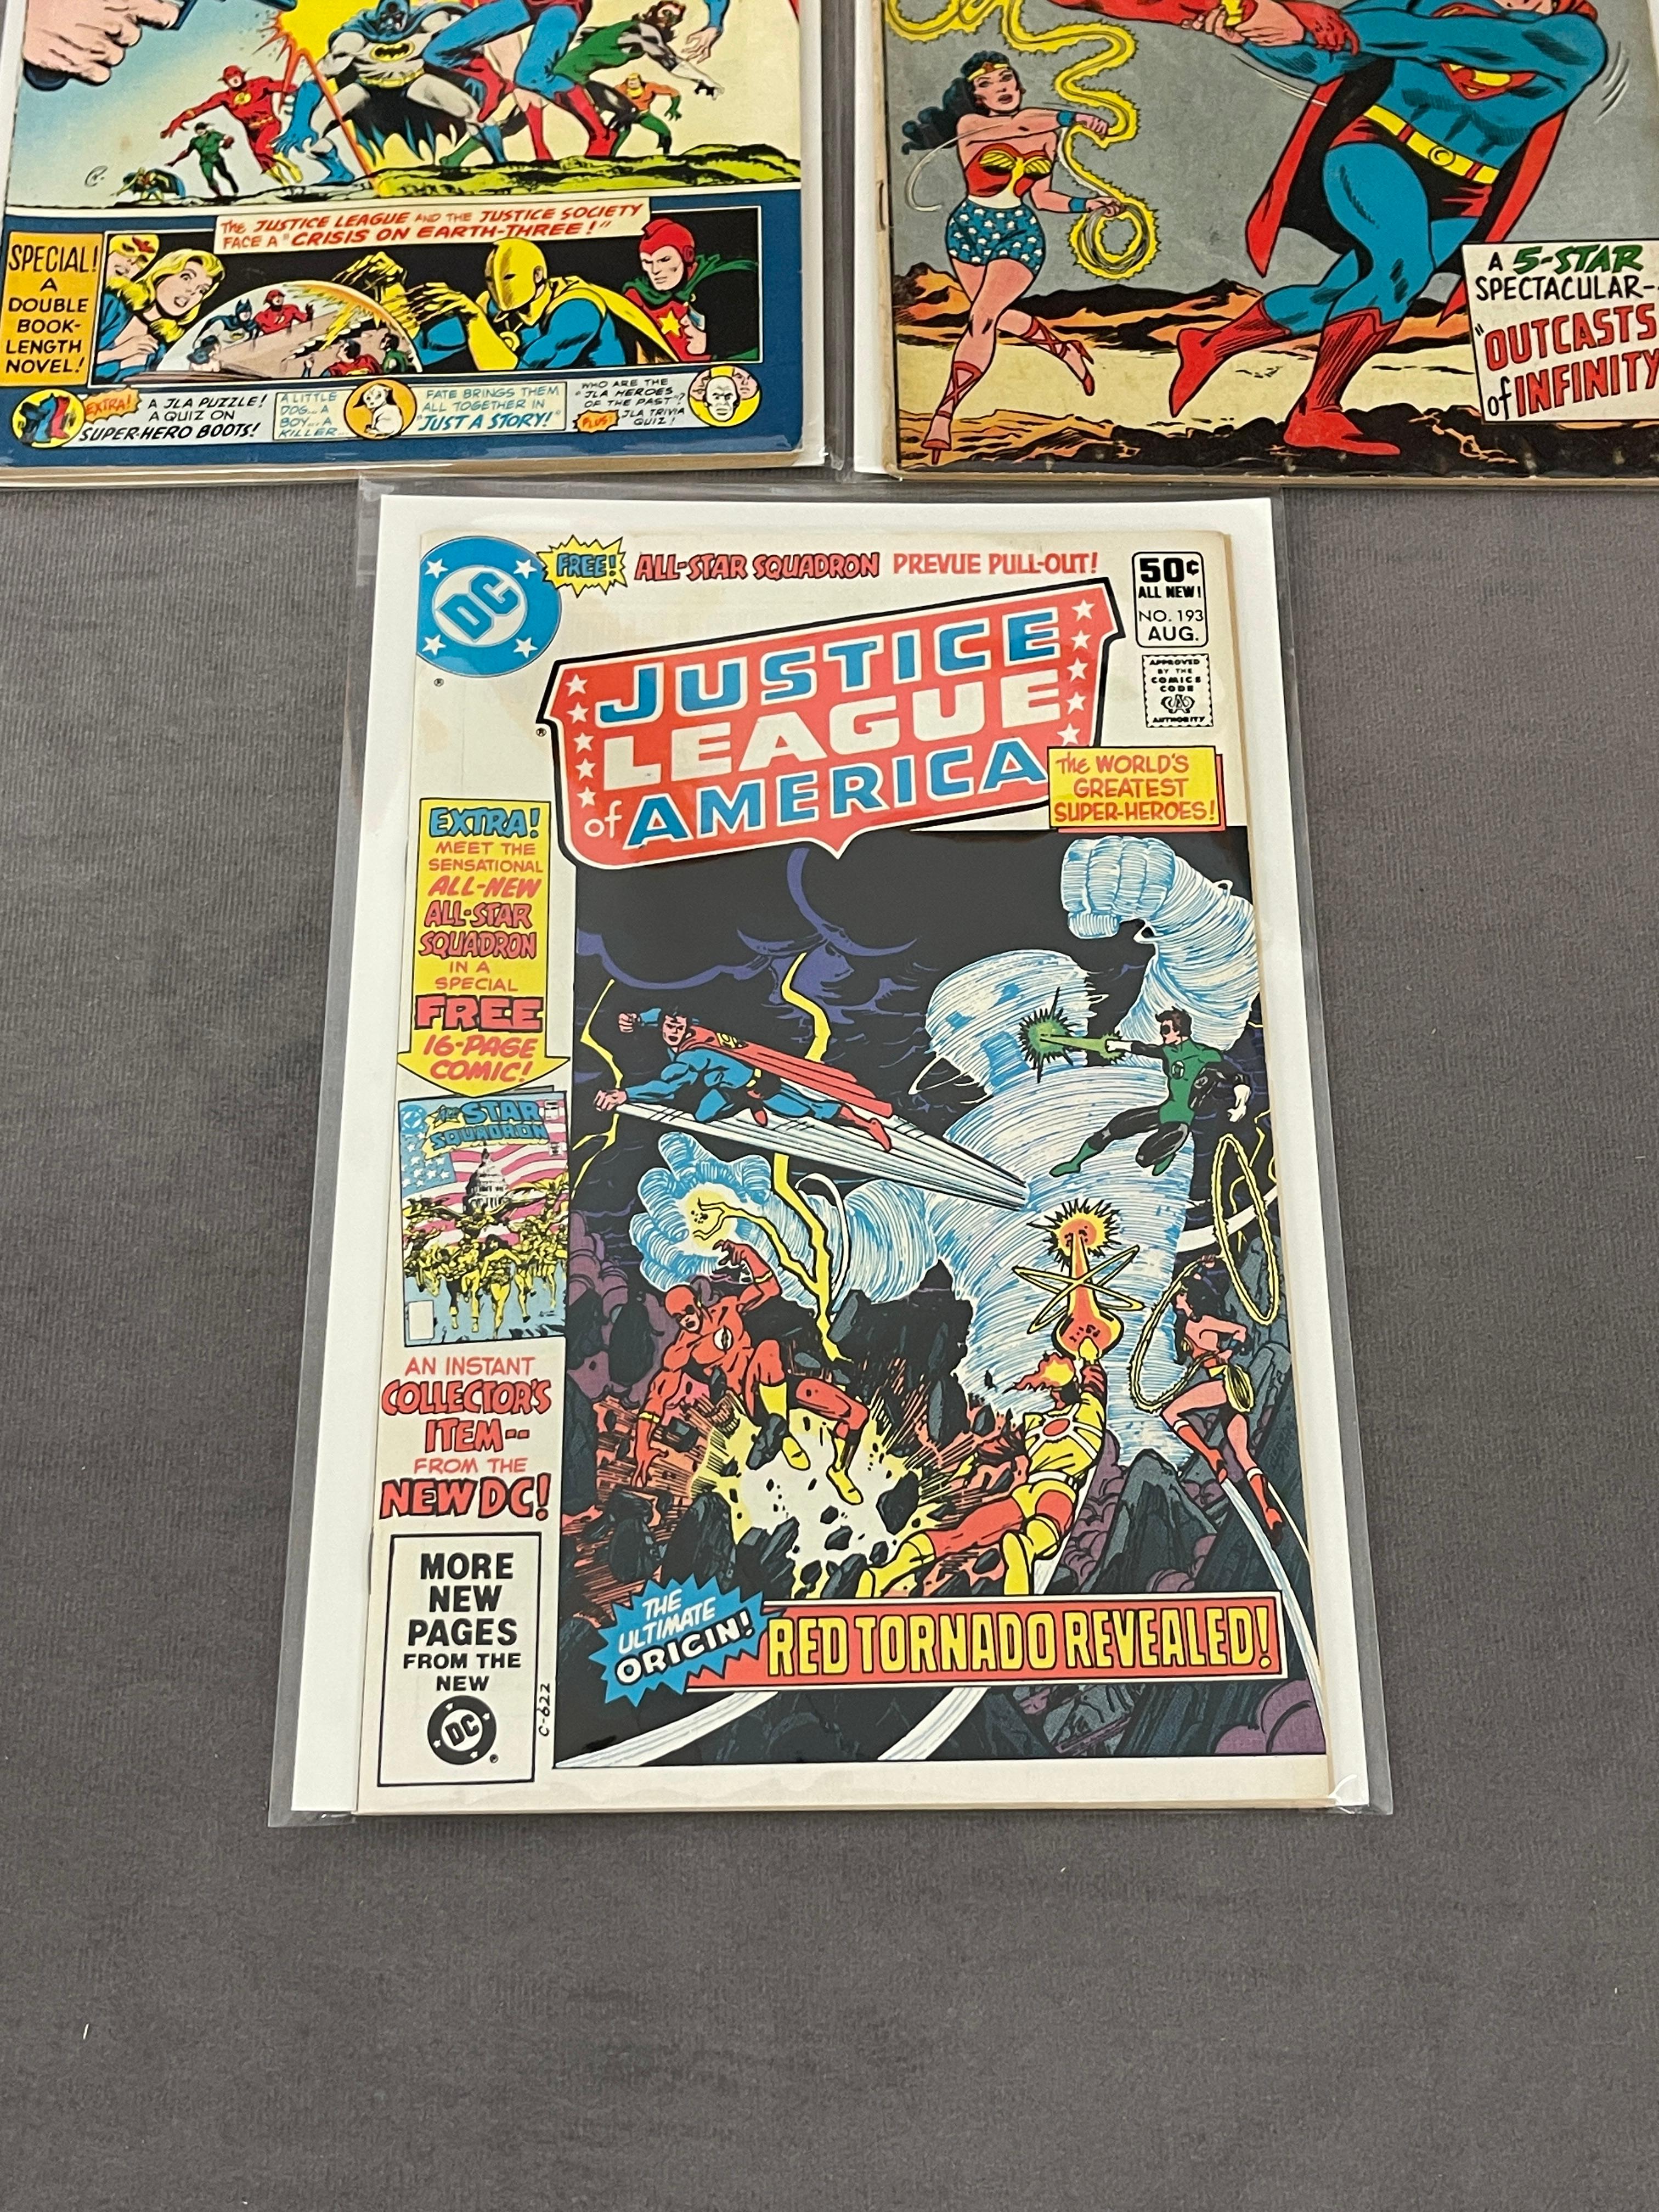 Justice League of America #14, #23, #25, #114, #193 DC Comic Book Collection Lot